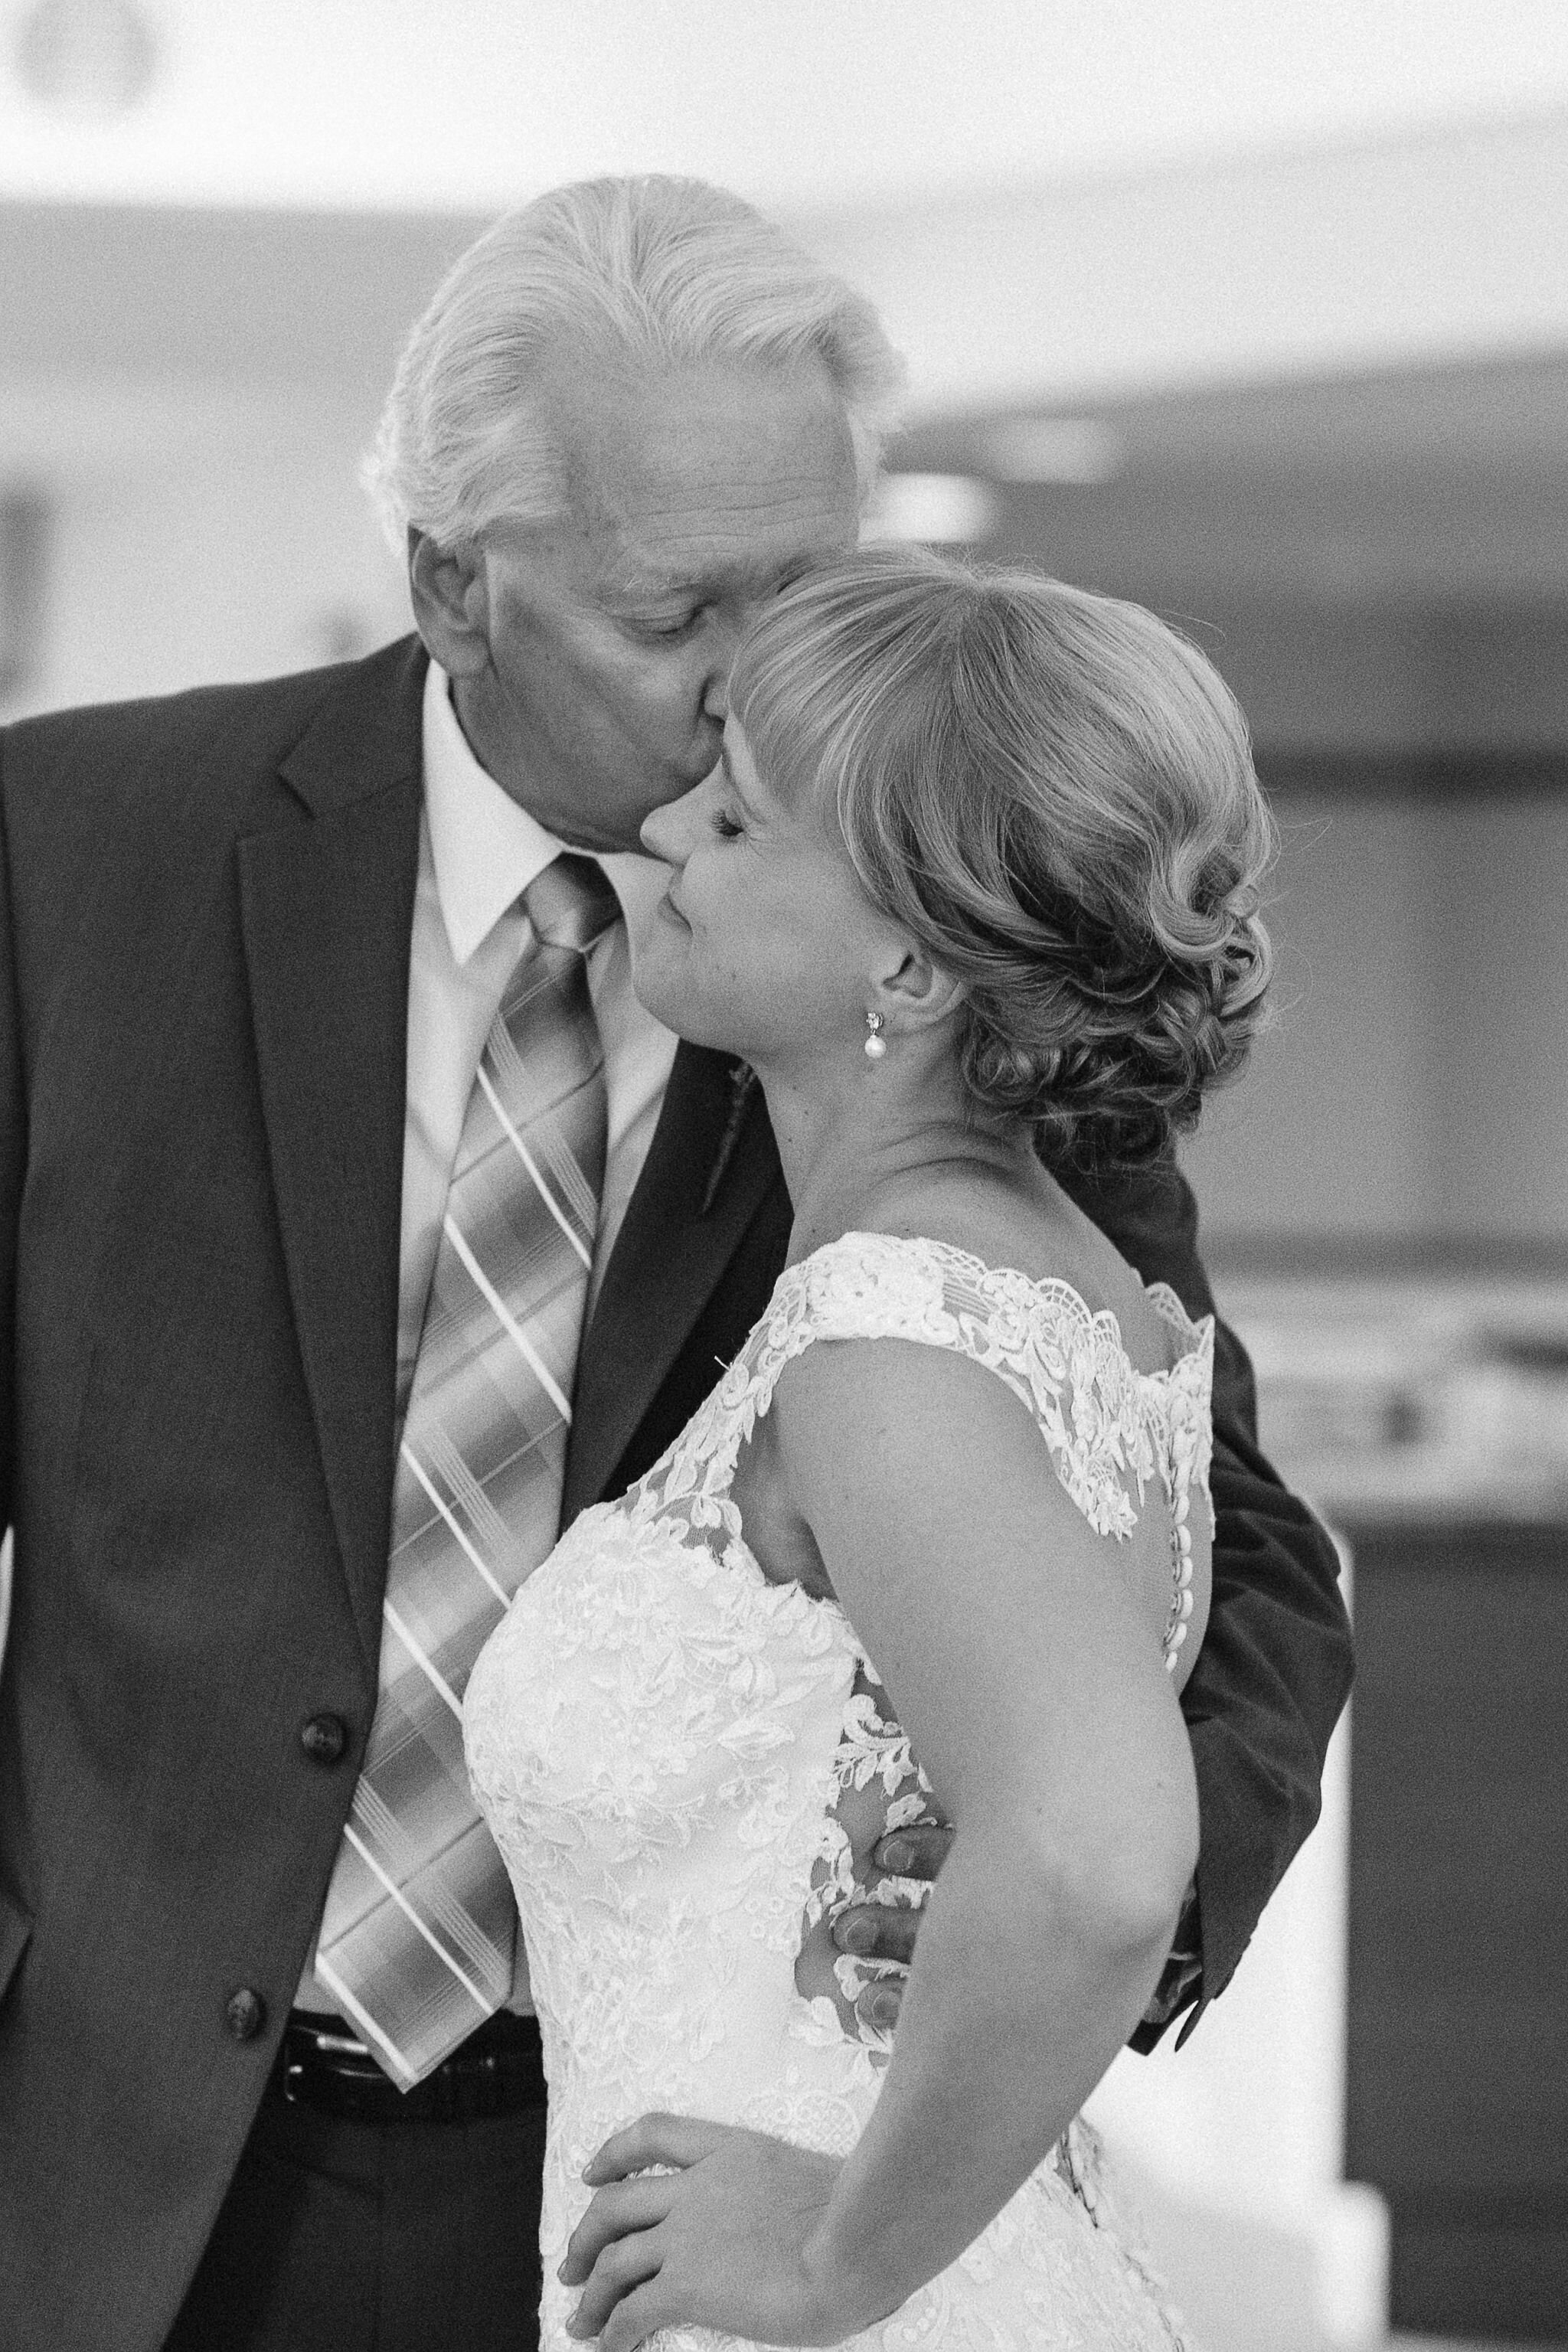 Father of the bride kissing her on the forehead